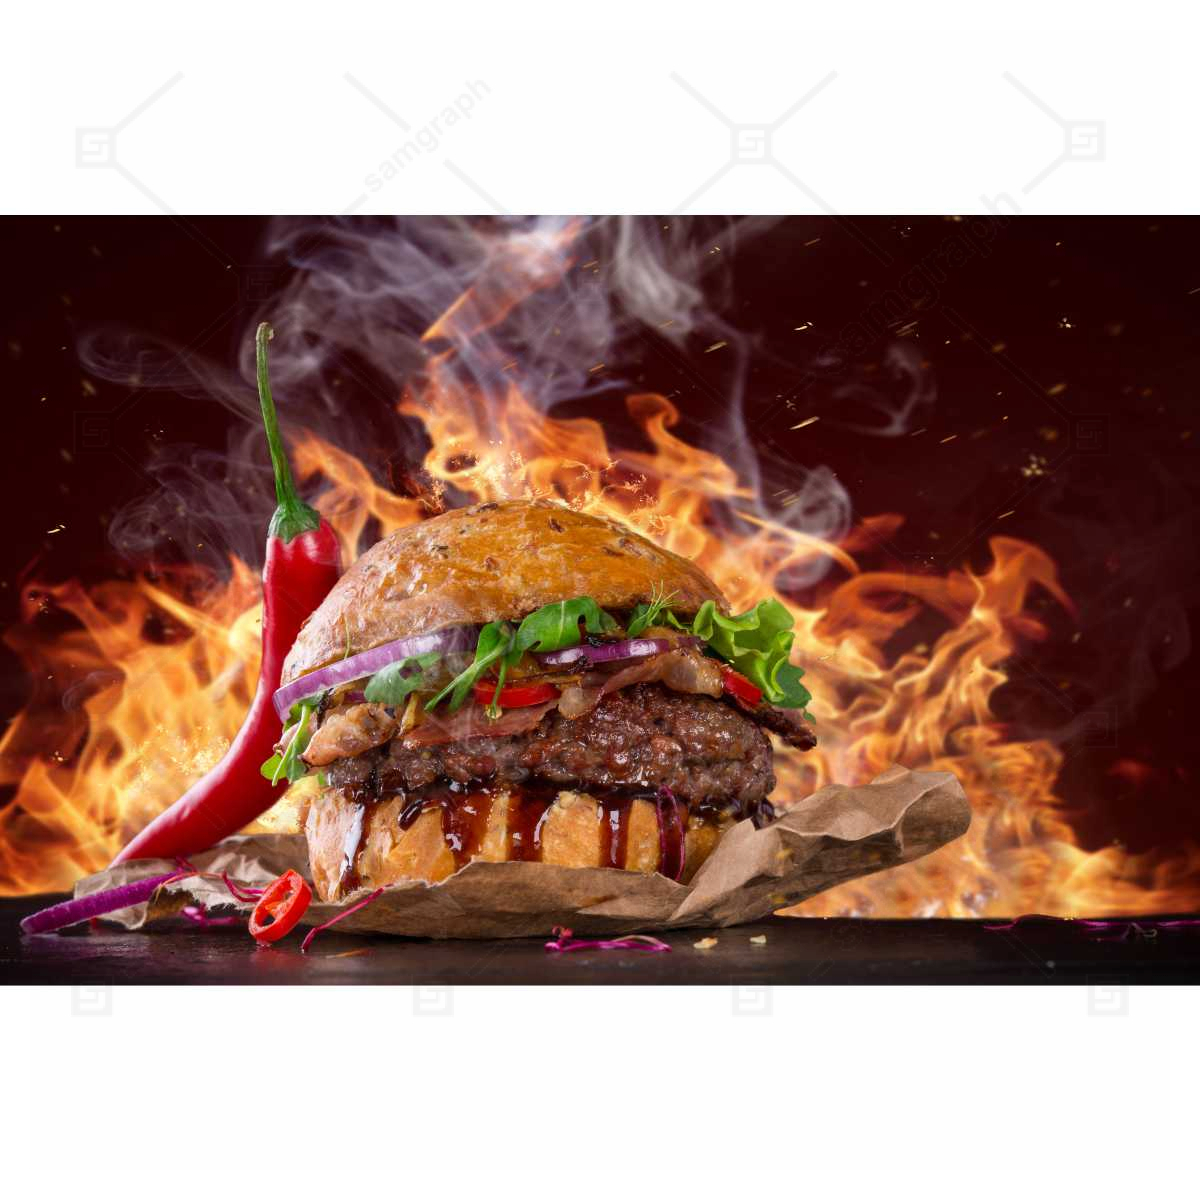 High quality photo of juicy hamburger with fire and pepper lettuce onion parsley 2 1 آیکون سه بعدی انگشتان روی هم